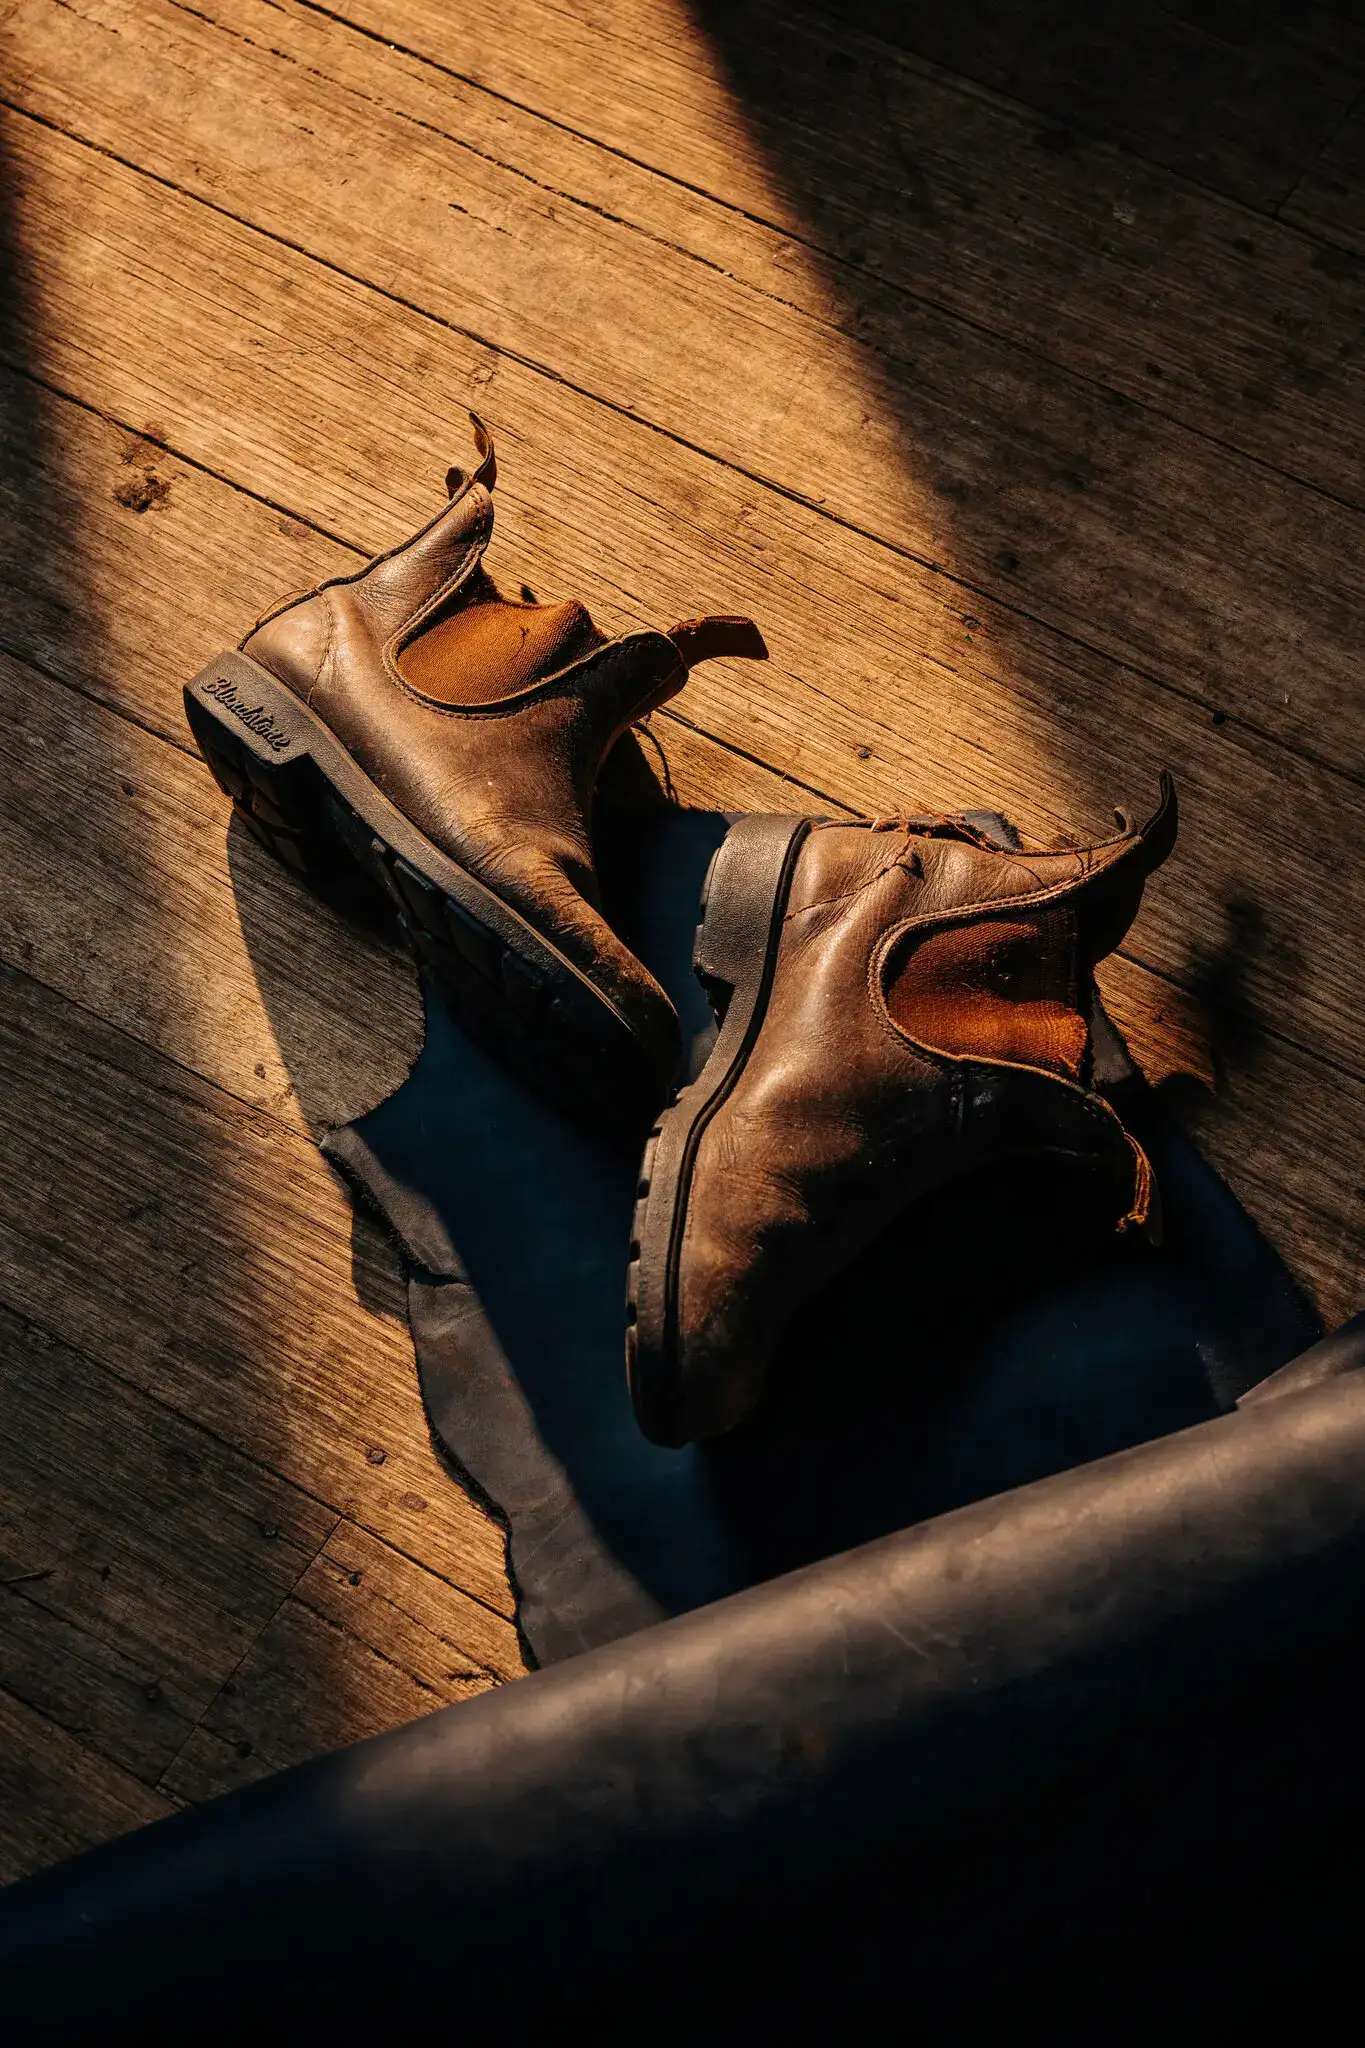 Blundstone’s Chelsea Boots Featured in NY Times